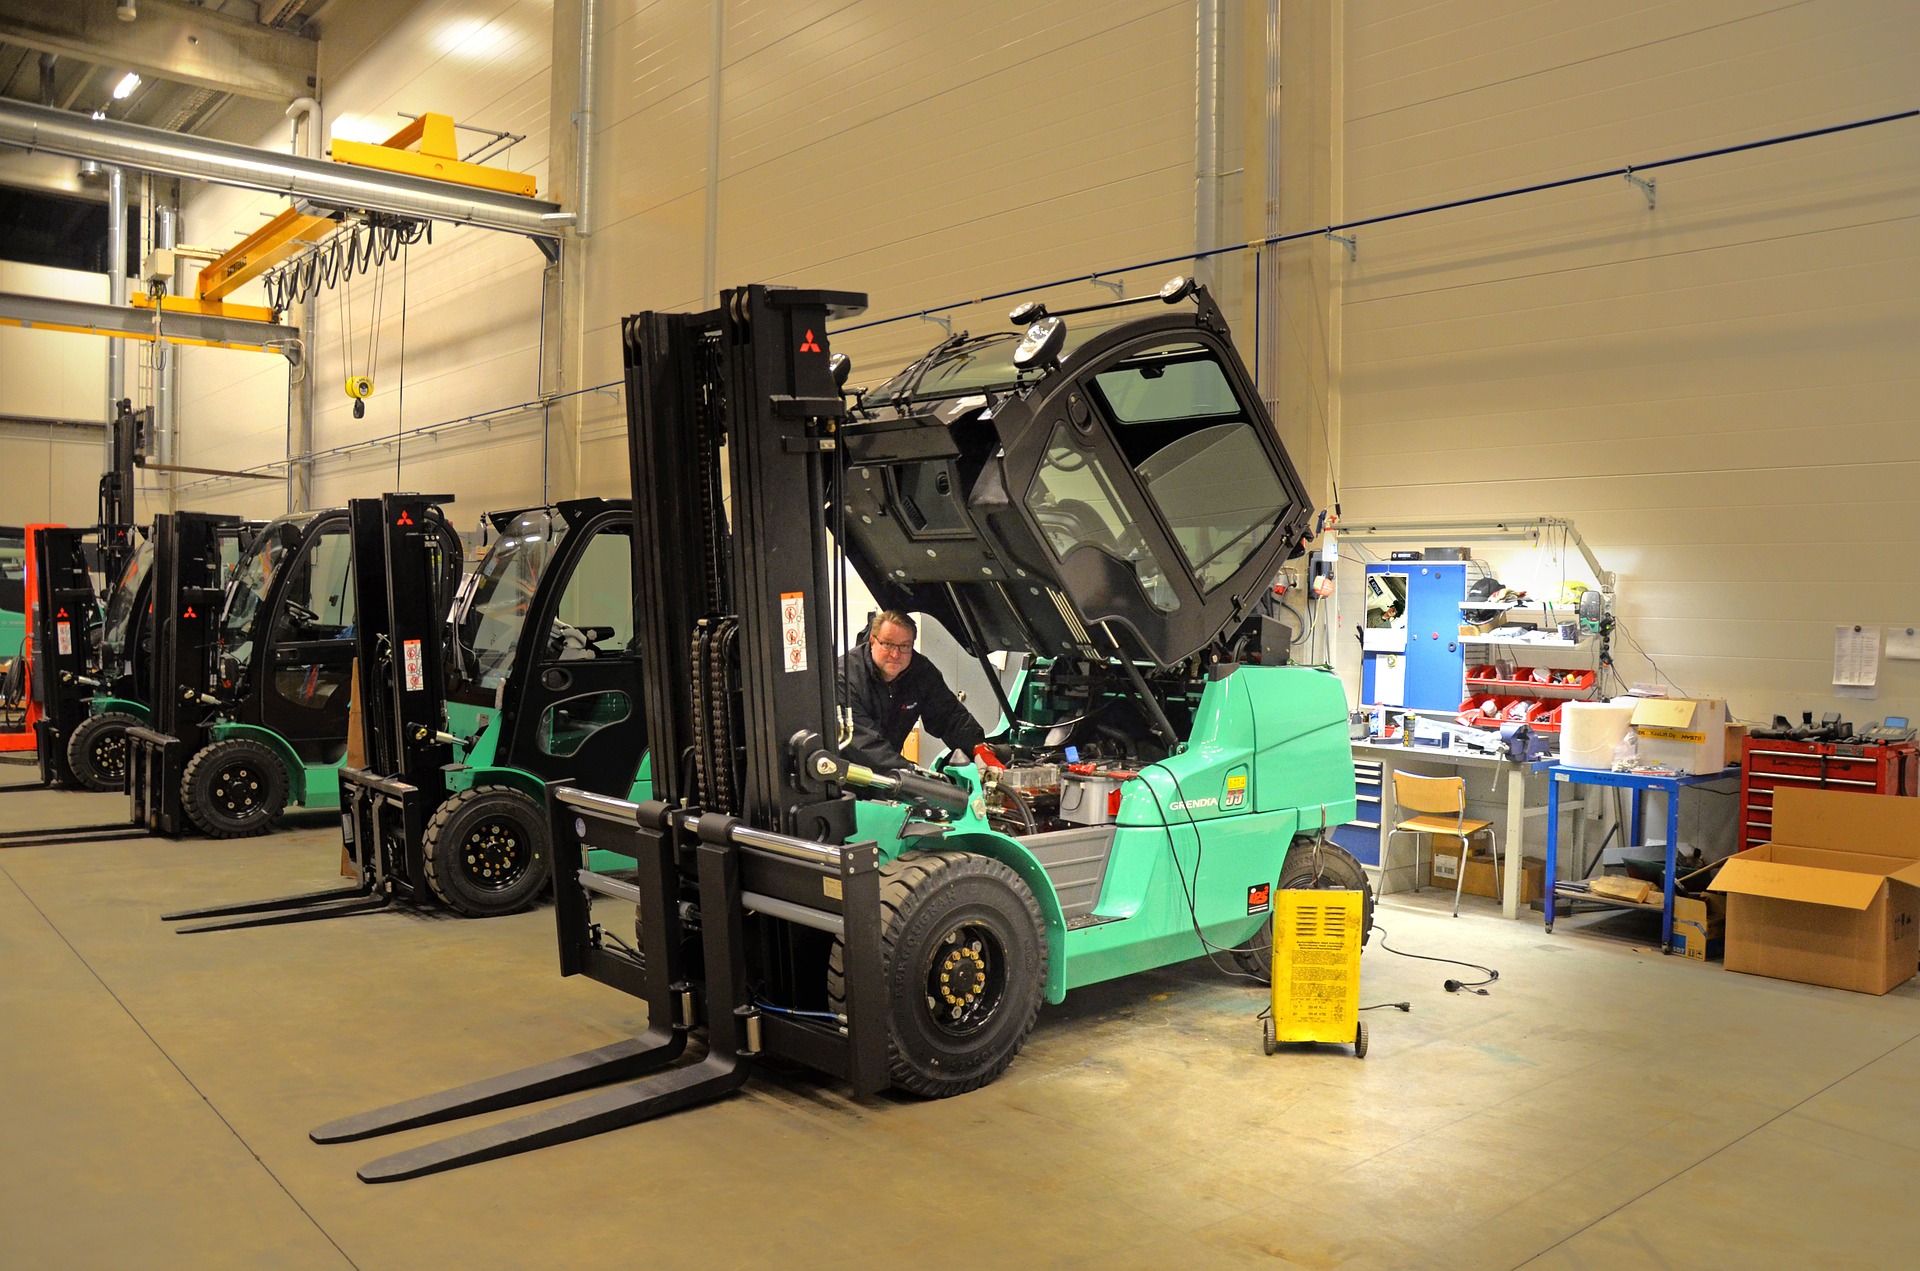 New forklifts for sale parked in a warehouse